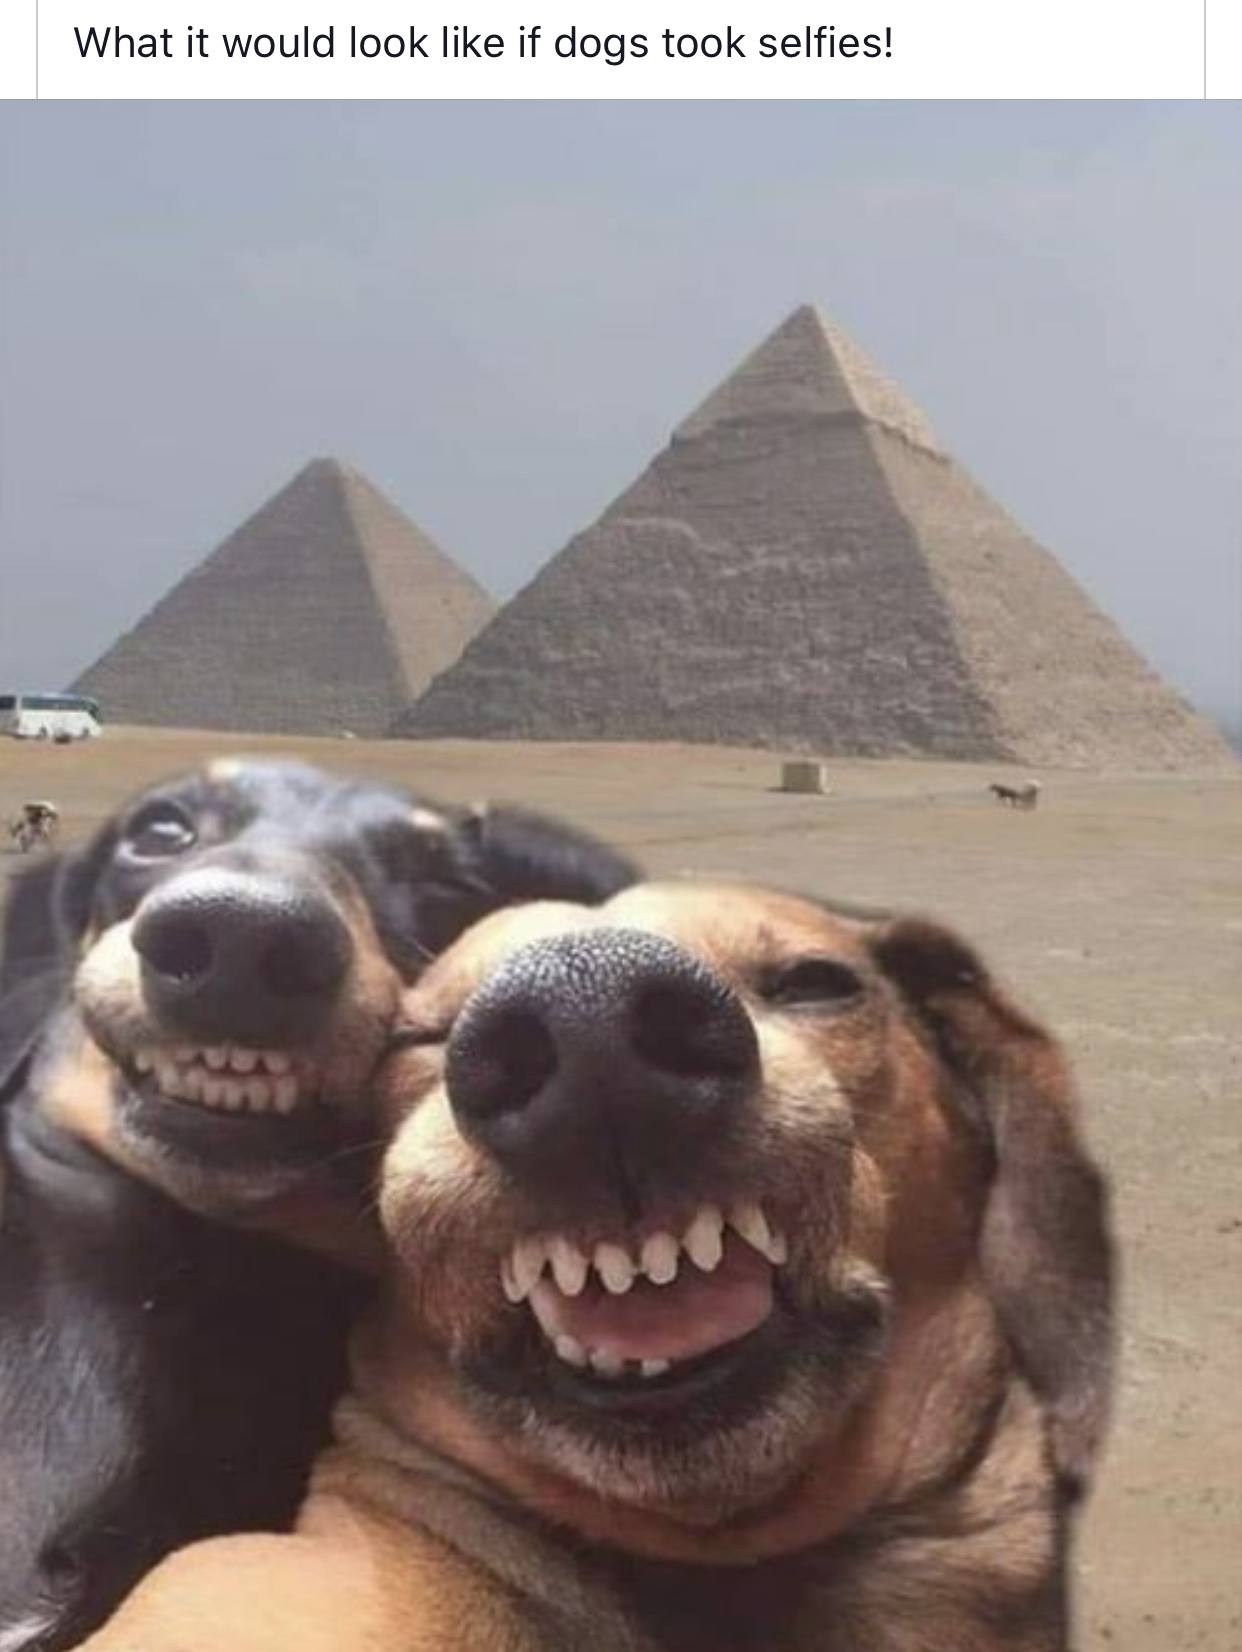 wholesome meme - giza necropolis - What it would look if dogs took selfies!